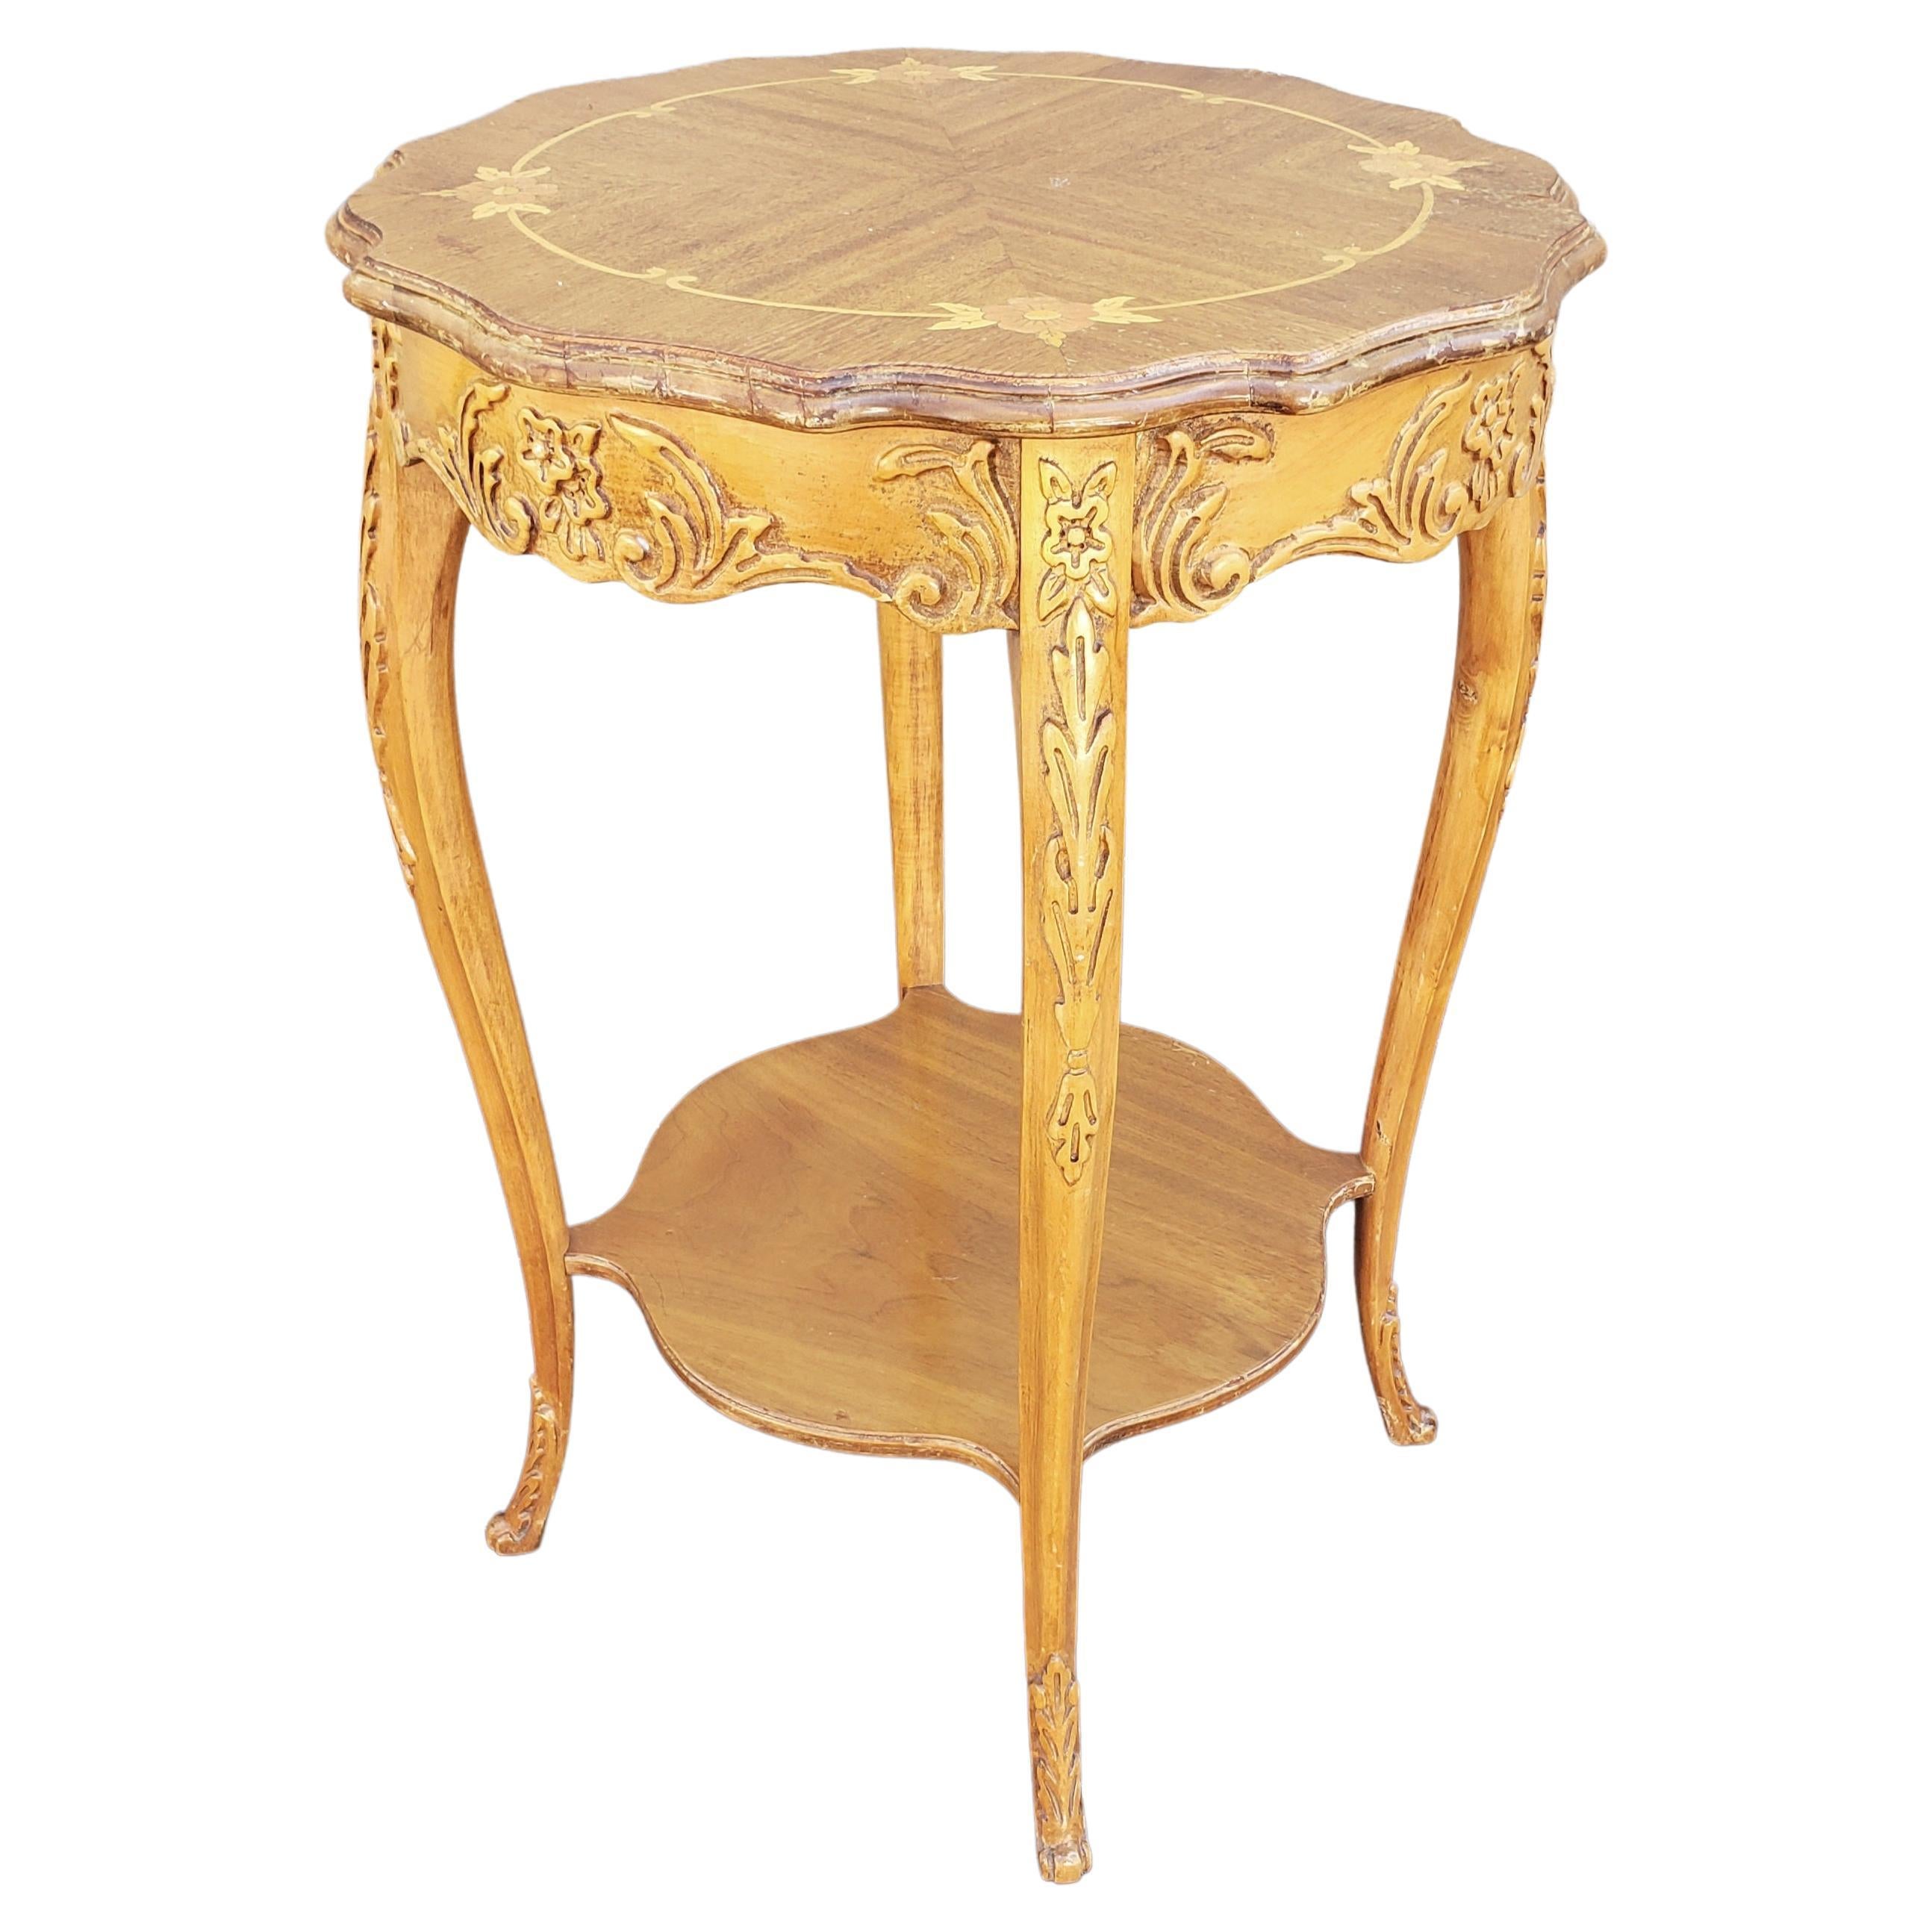 Italian Rococo Revival Marquetry Fruitwood Side Table For Sale